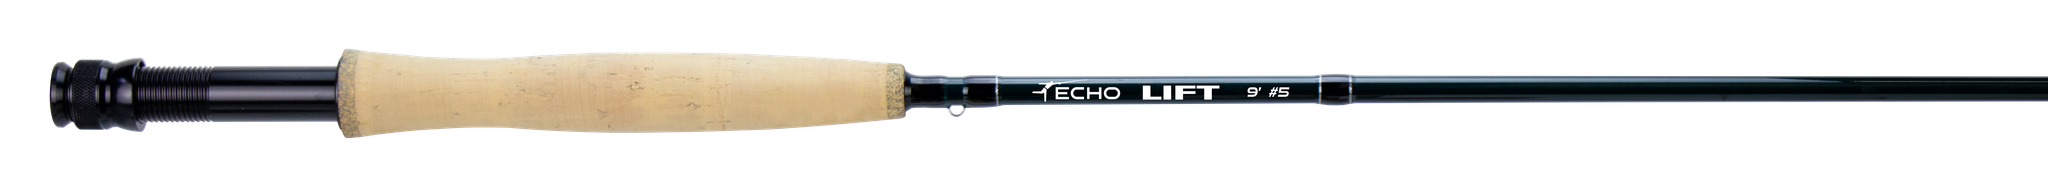 ECHO BASE 790-4 9' FOOT #7 WEIGHT 4 PIECE FLY ROD SHIPPING TUBE FREE U.S 